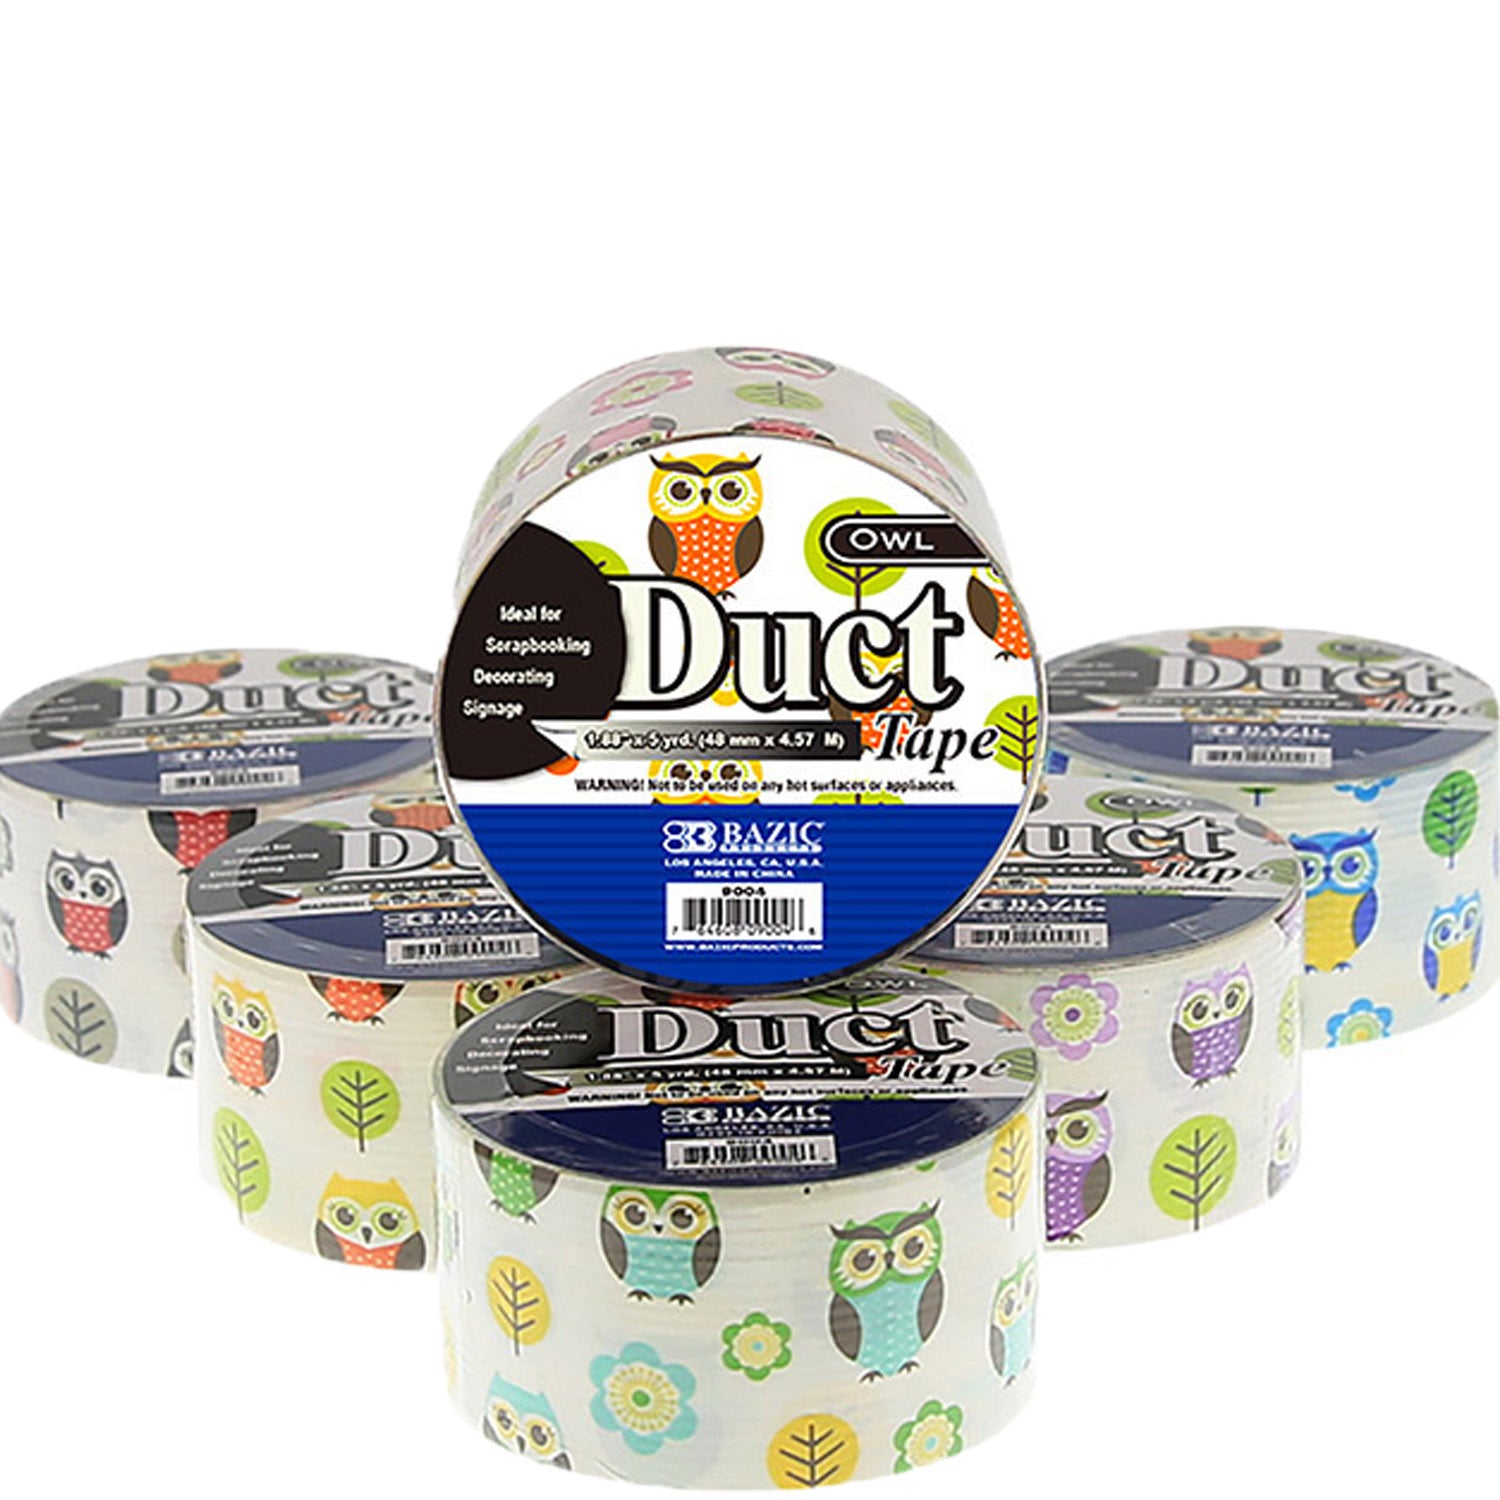 Party Supplies Duct Tape Owl Series - Assorted Colored - 1.88 x 5 Yards3-Pack - G8 Central